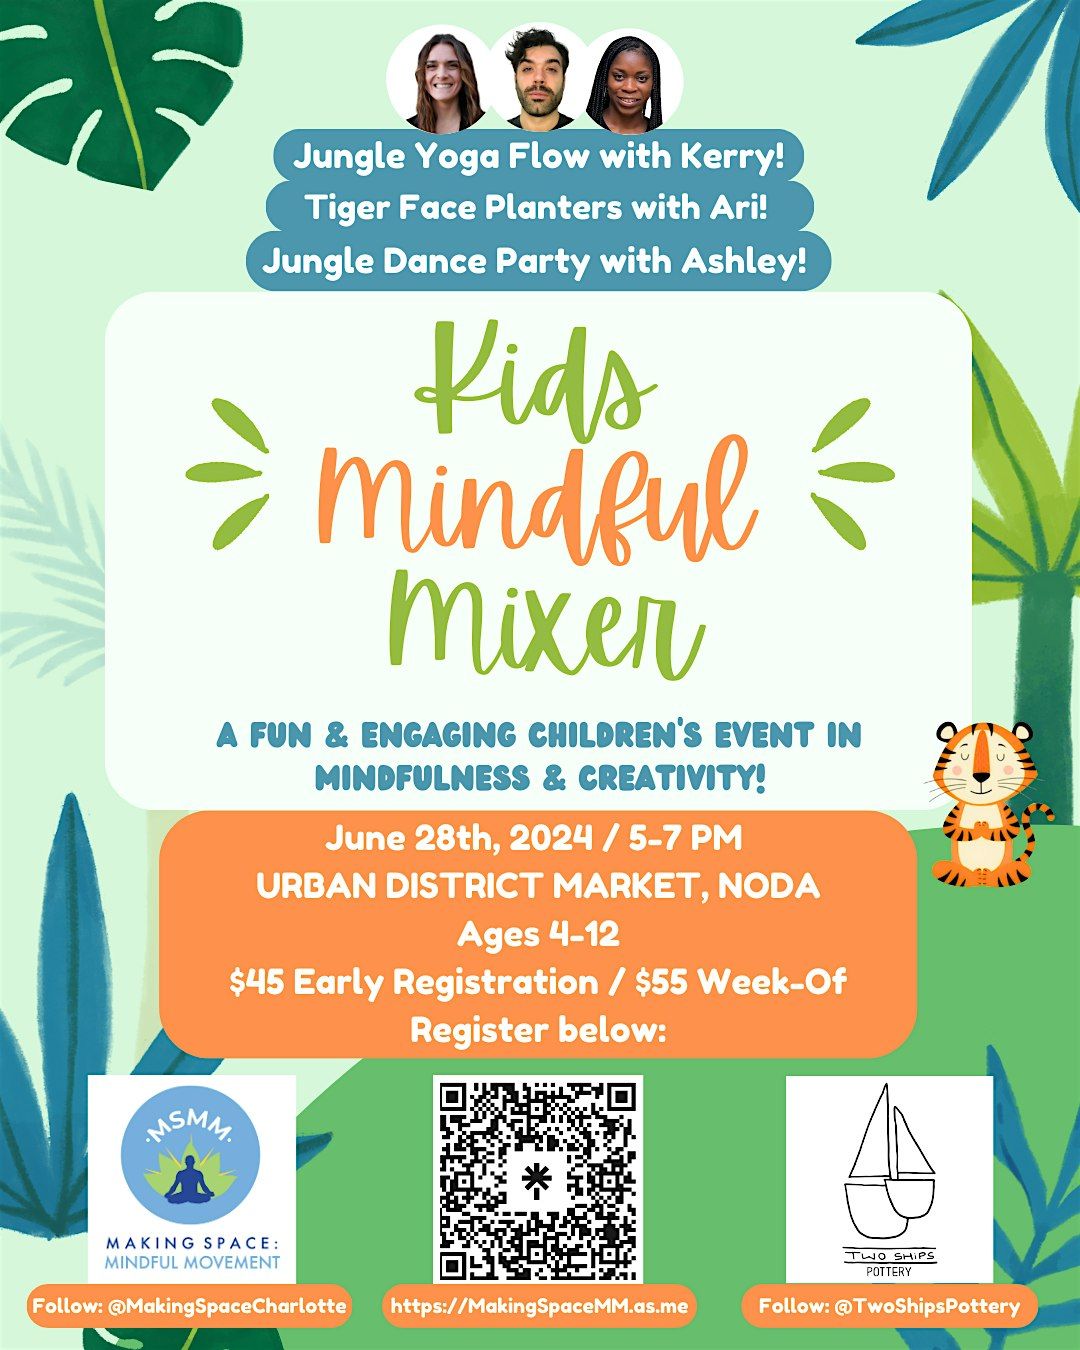 Kid's Mindful Mixer - Early Bird Pricing until 6\/24 - Read Description!